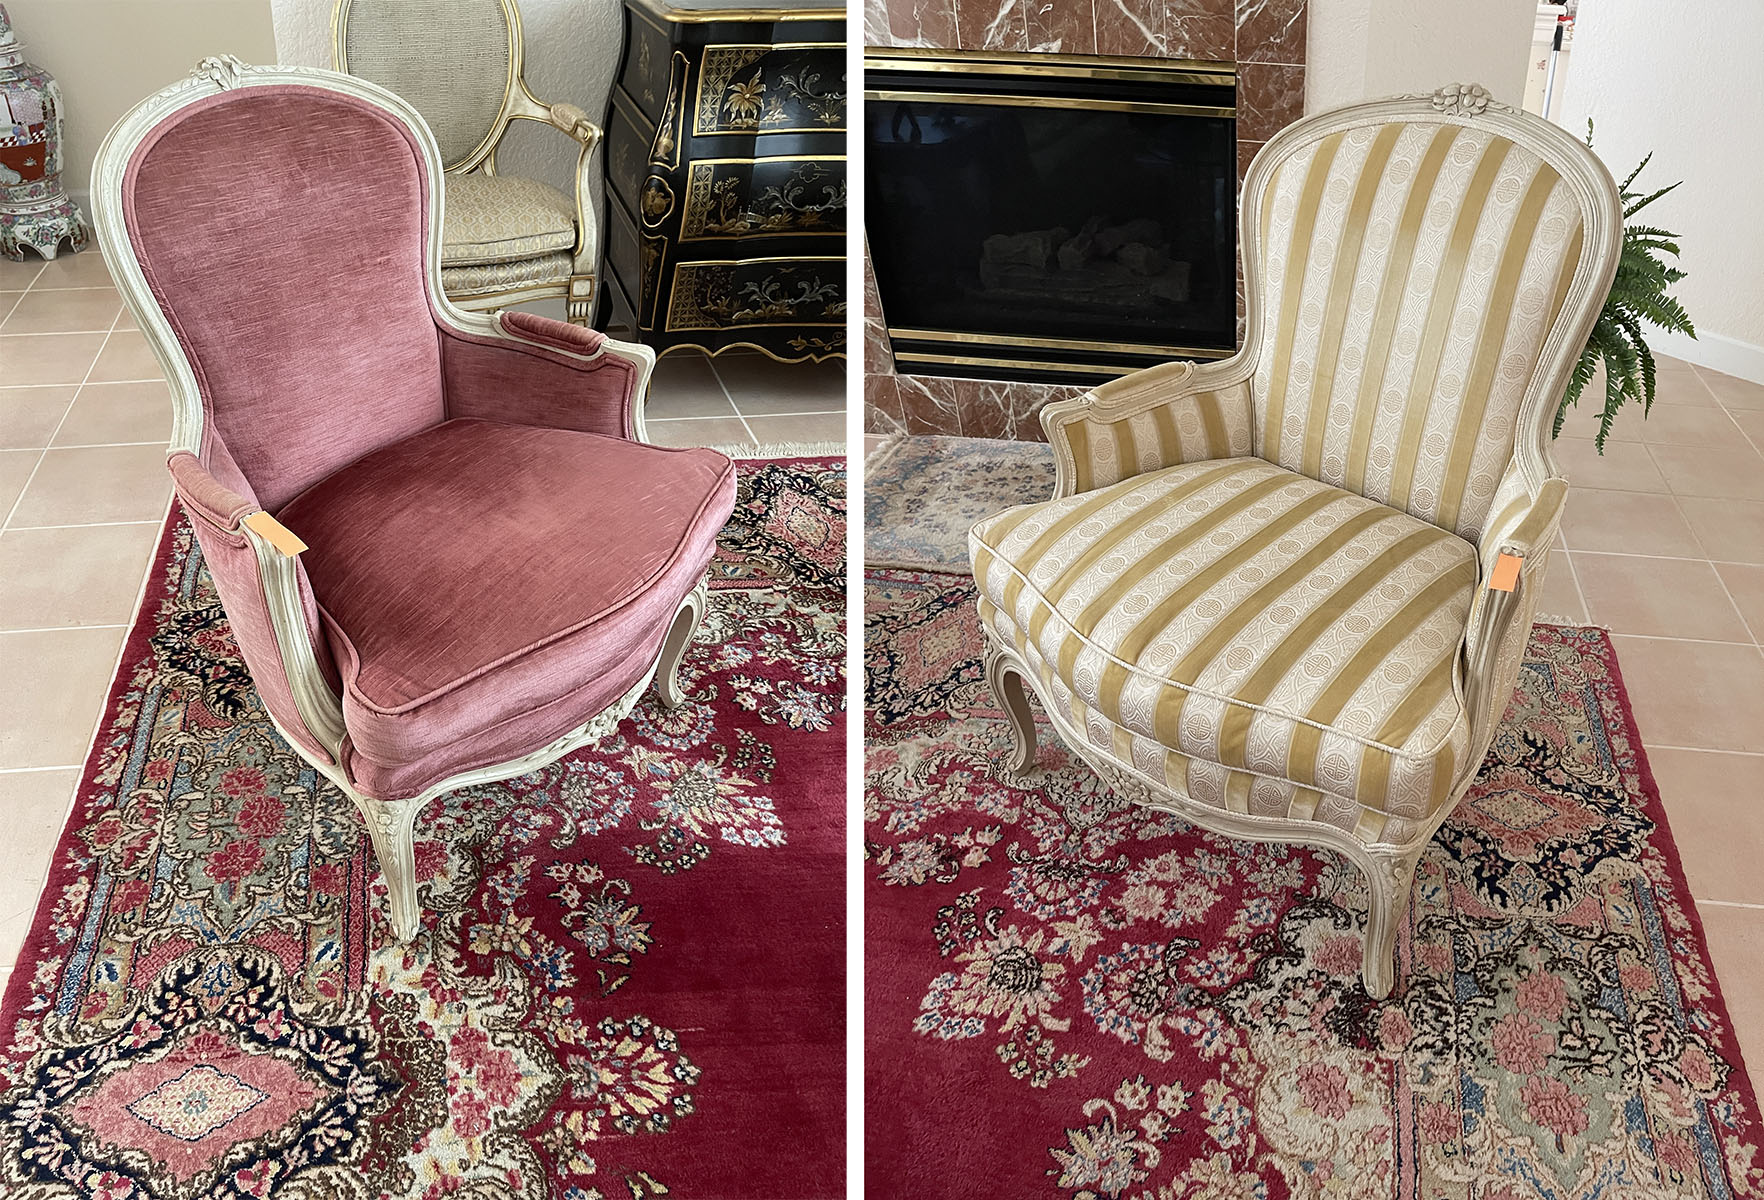 2 CARVED FRENCH BERGERE CHAIRS: